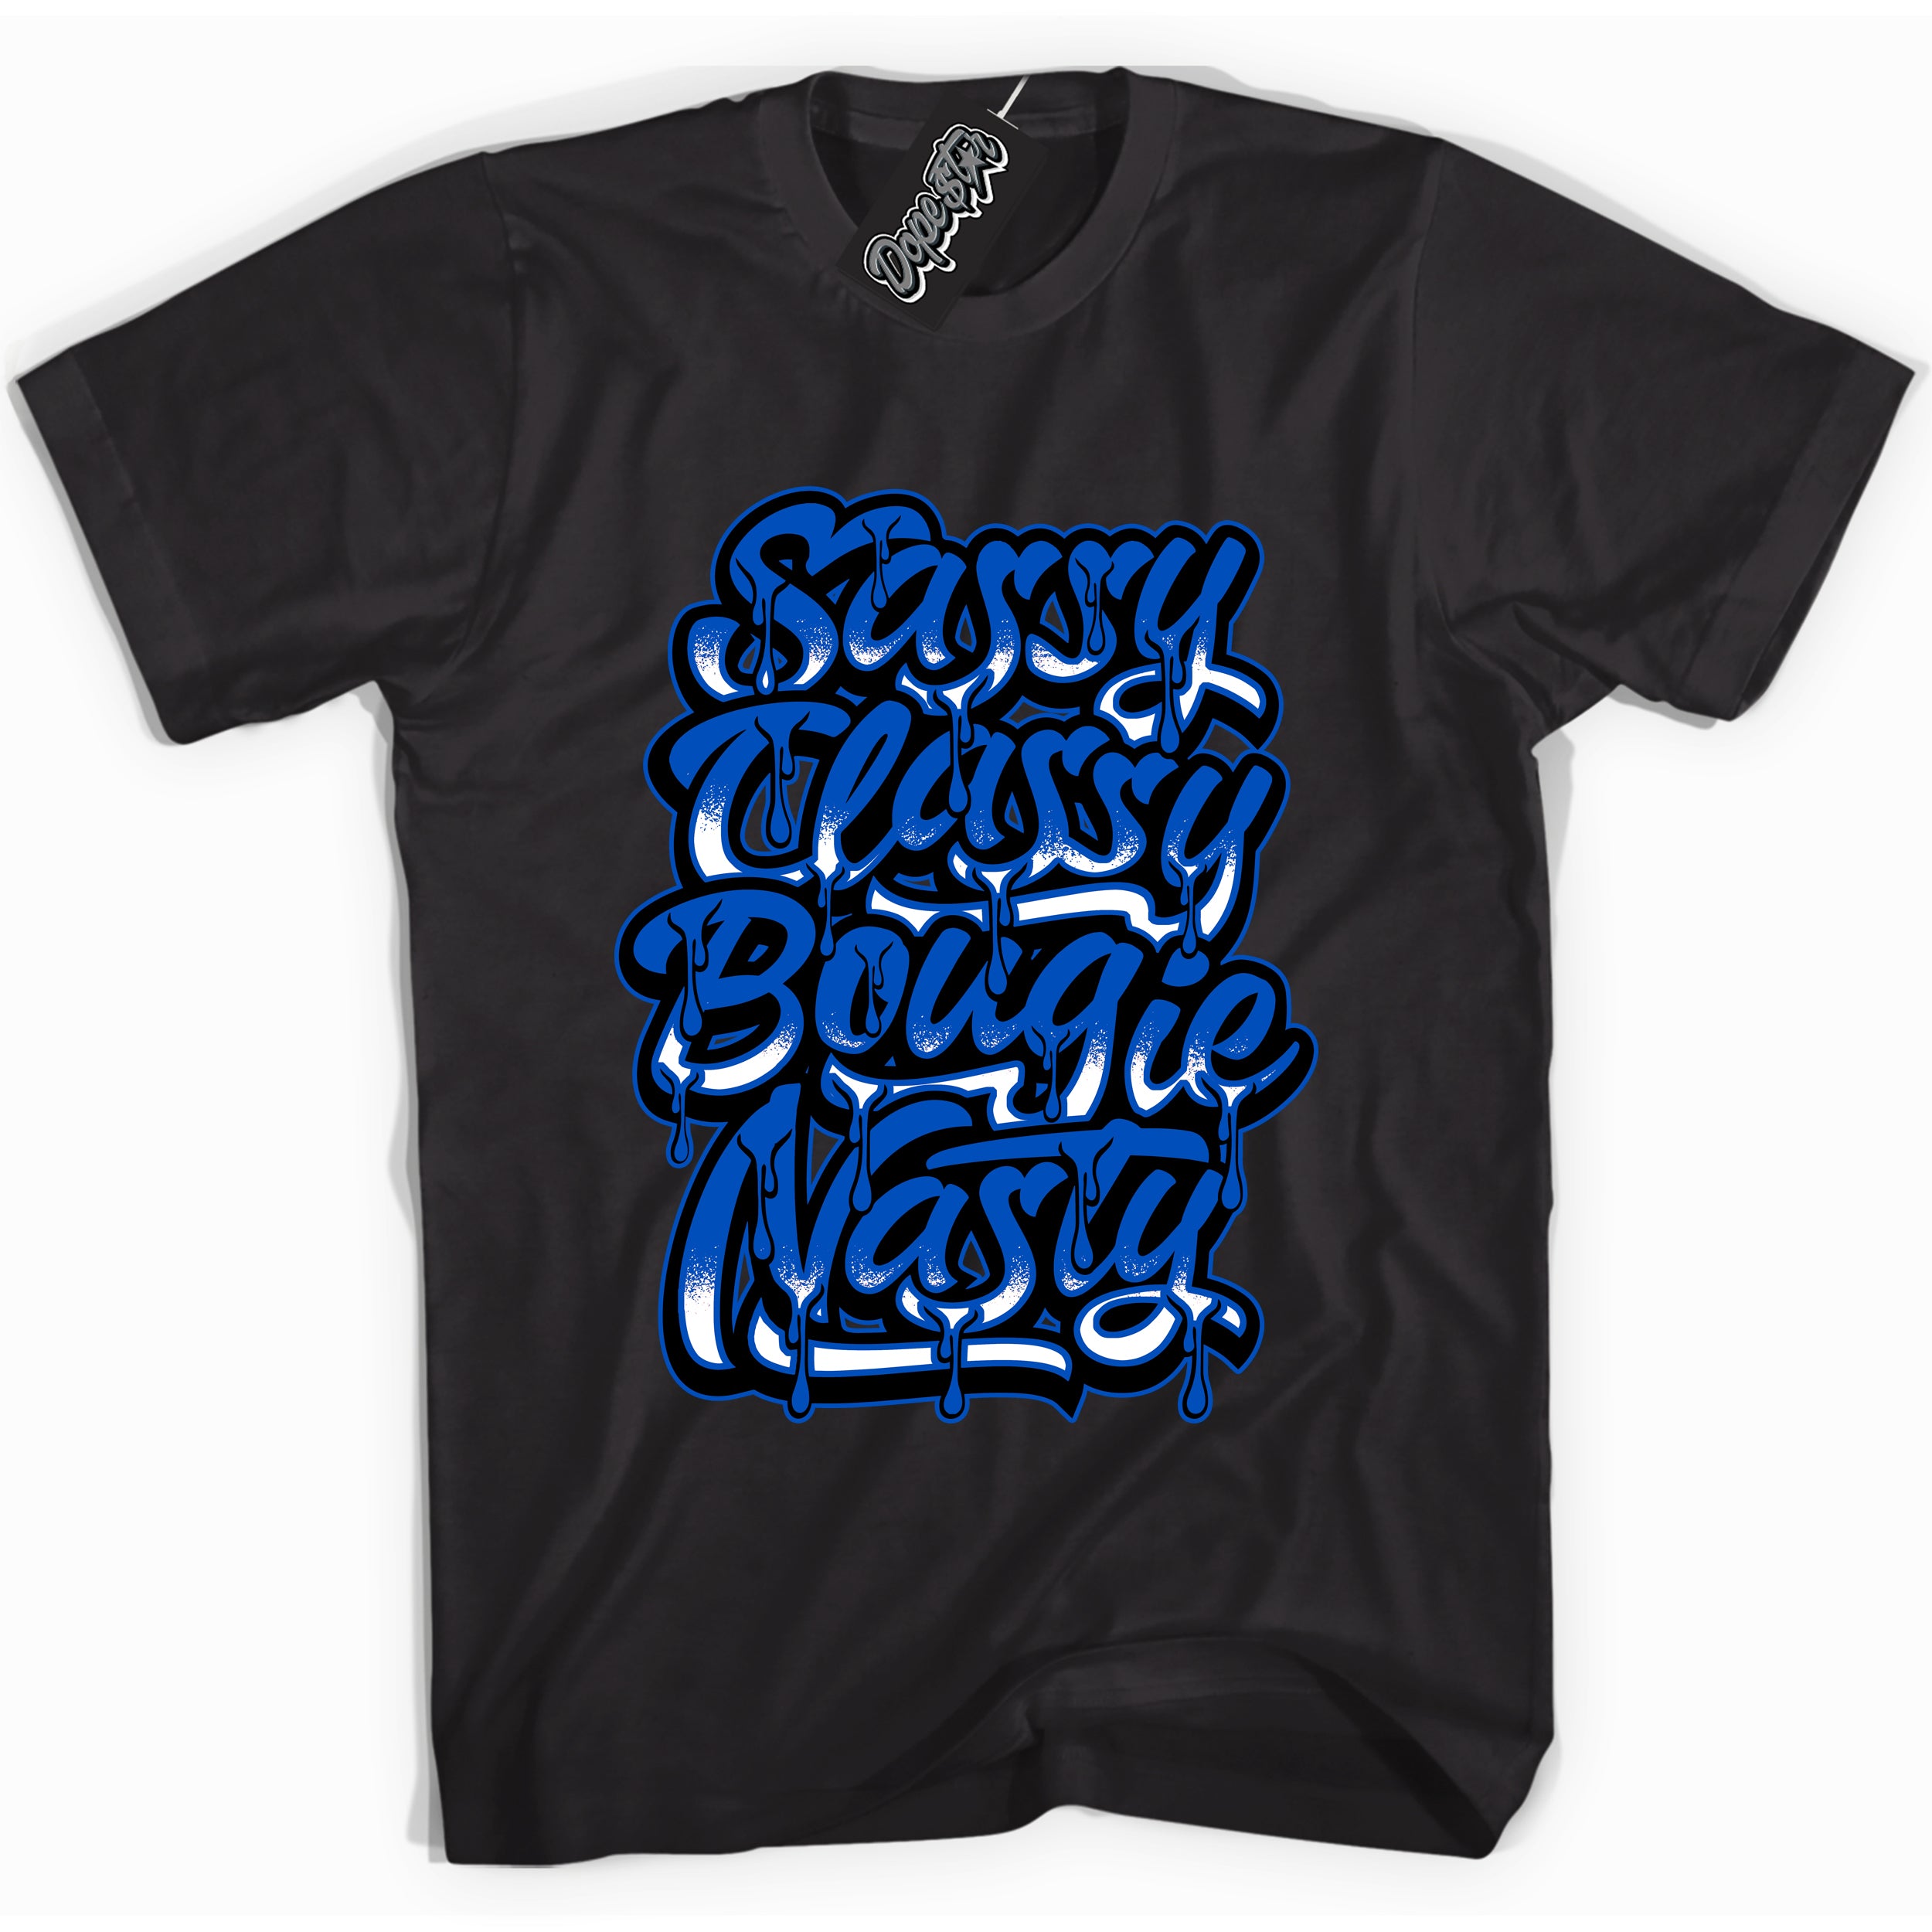 Cool Black graphic tee with Sassy Classy print, that perfectly matches OG Royal Reimagined 1s sneakers 